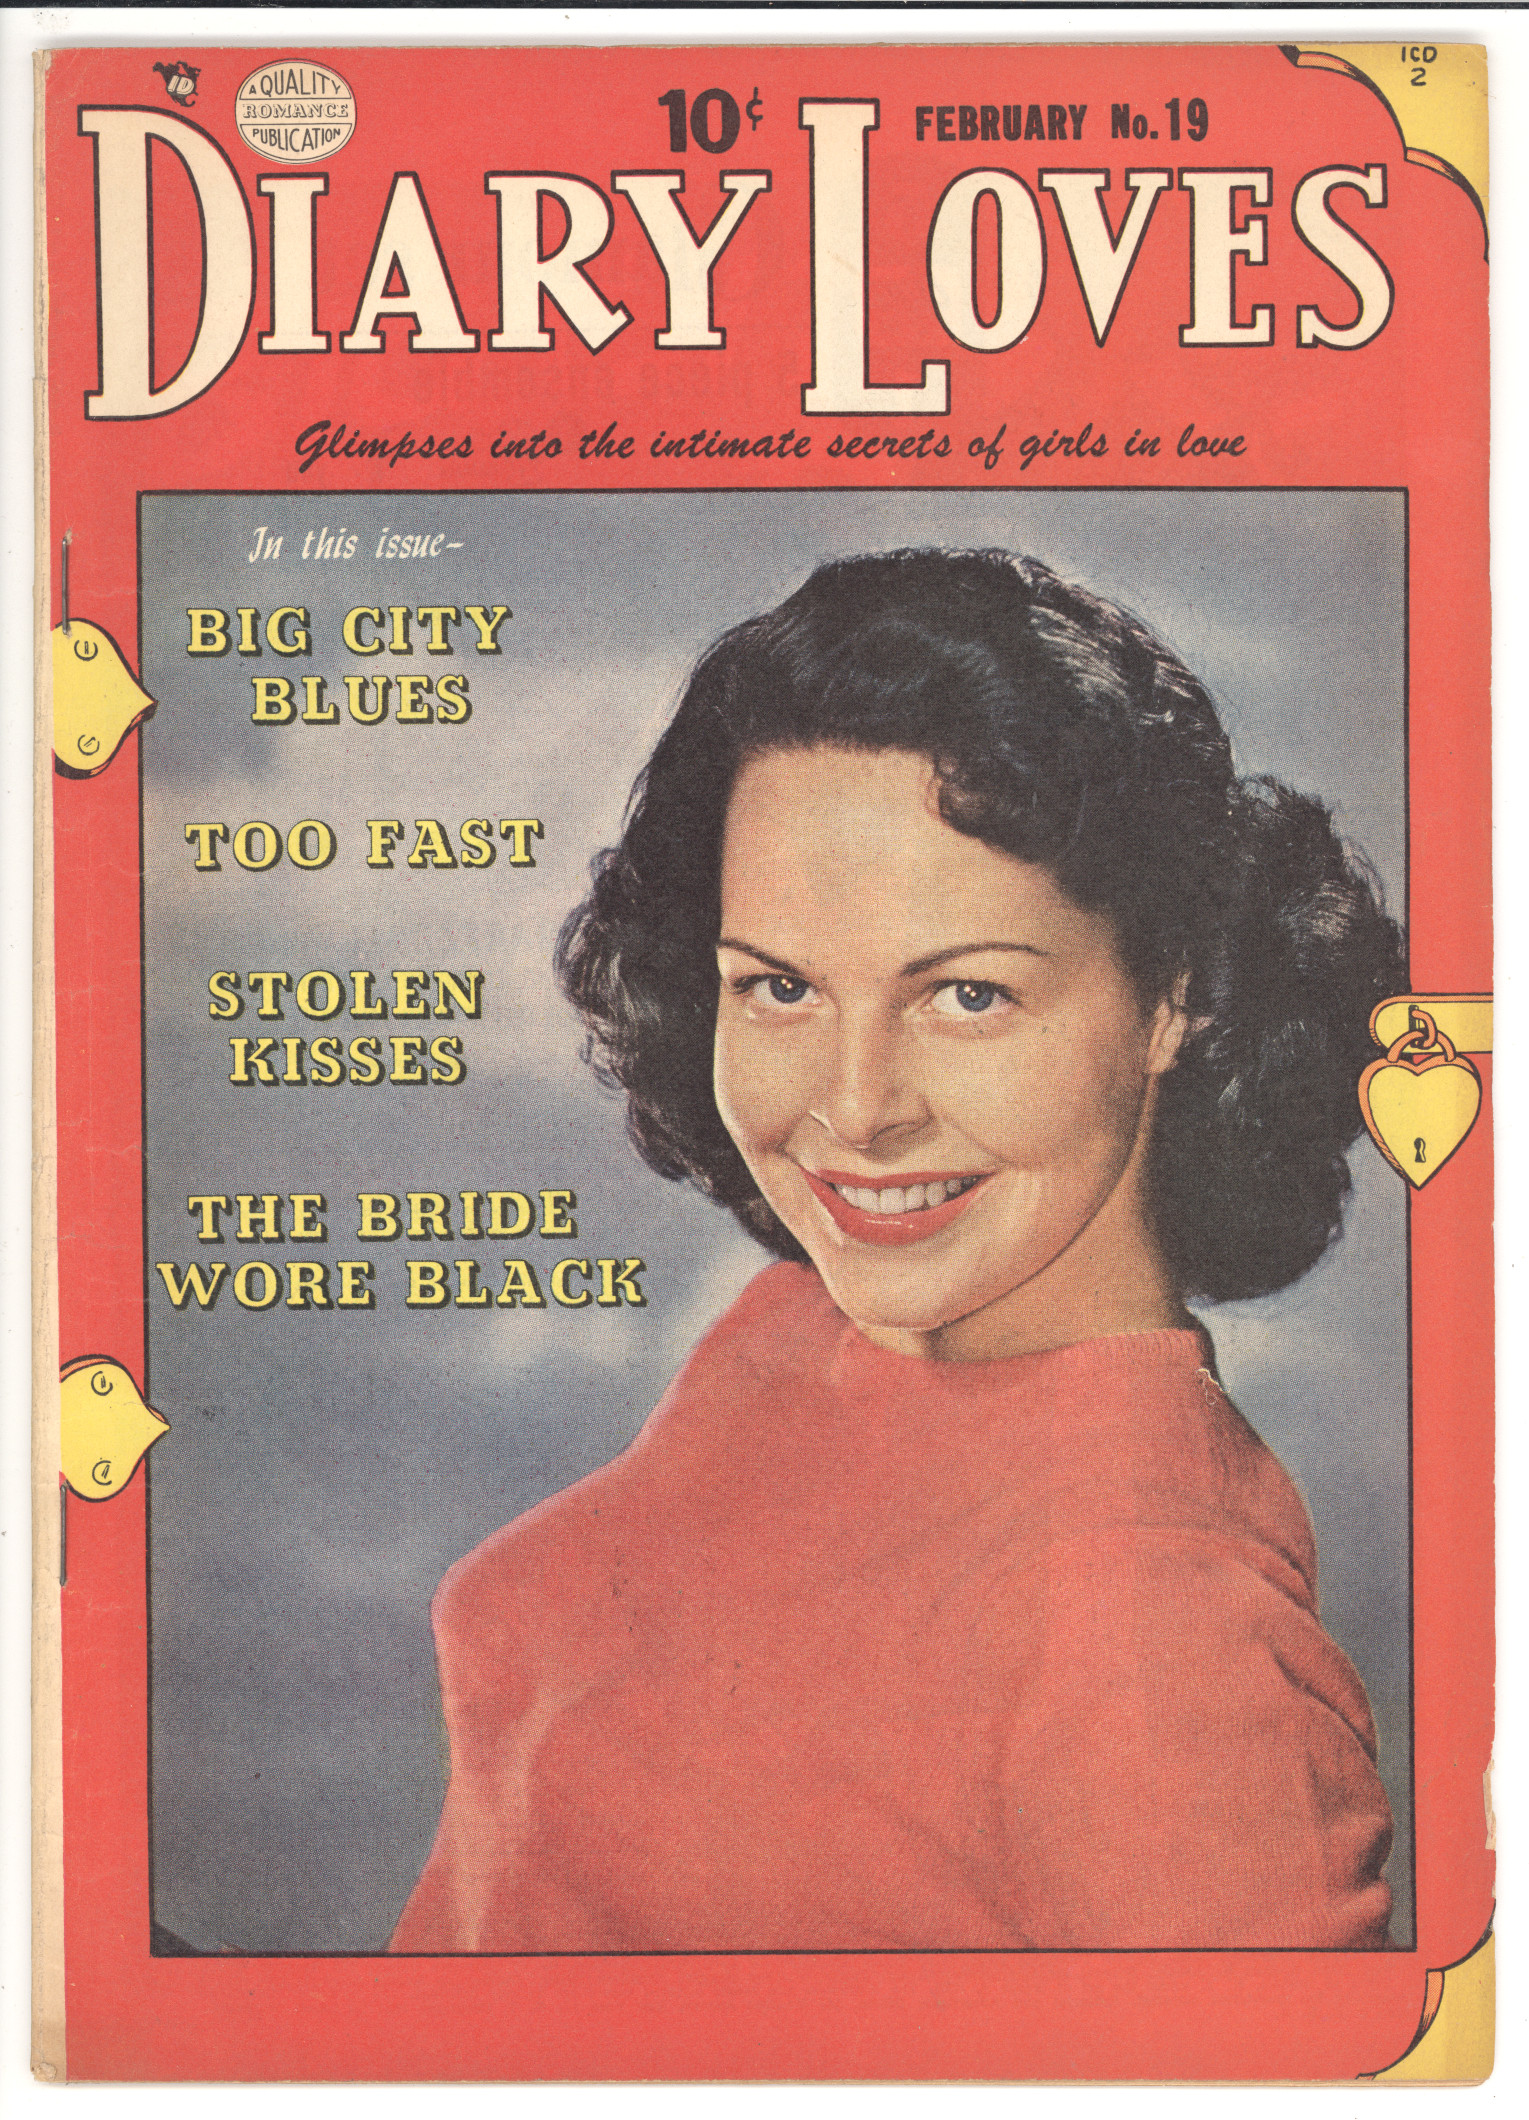 Diary Loves #19 front